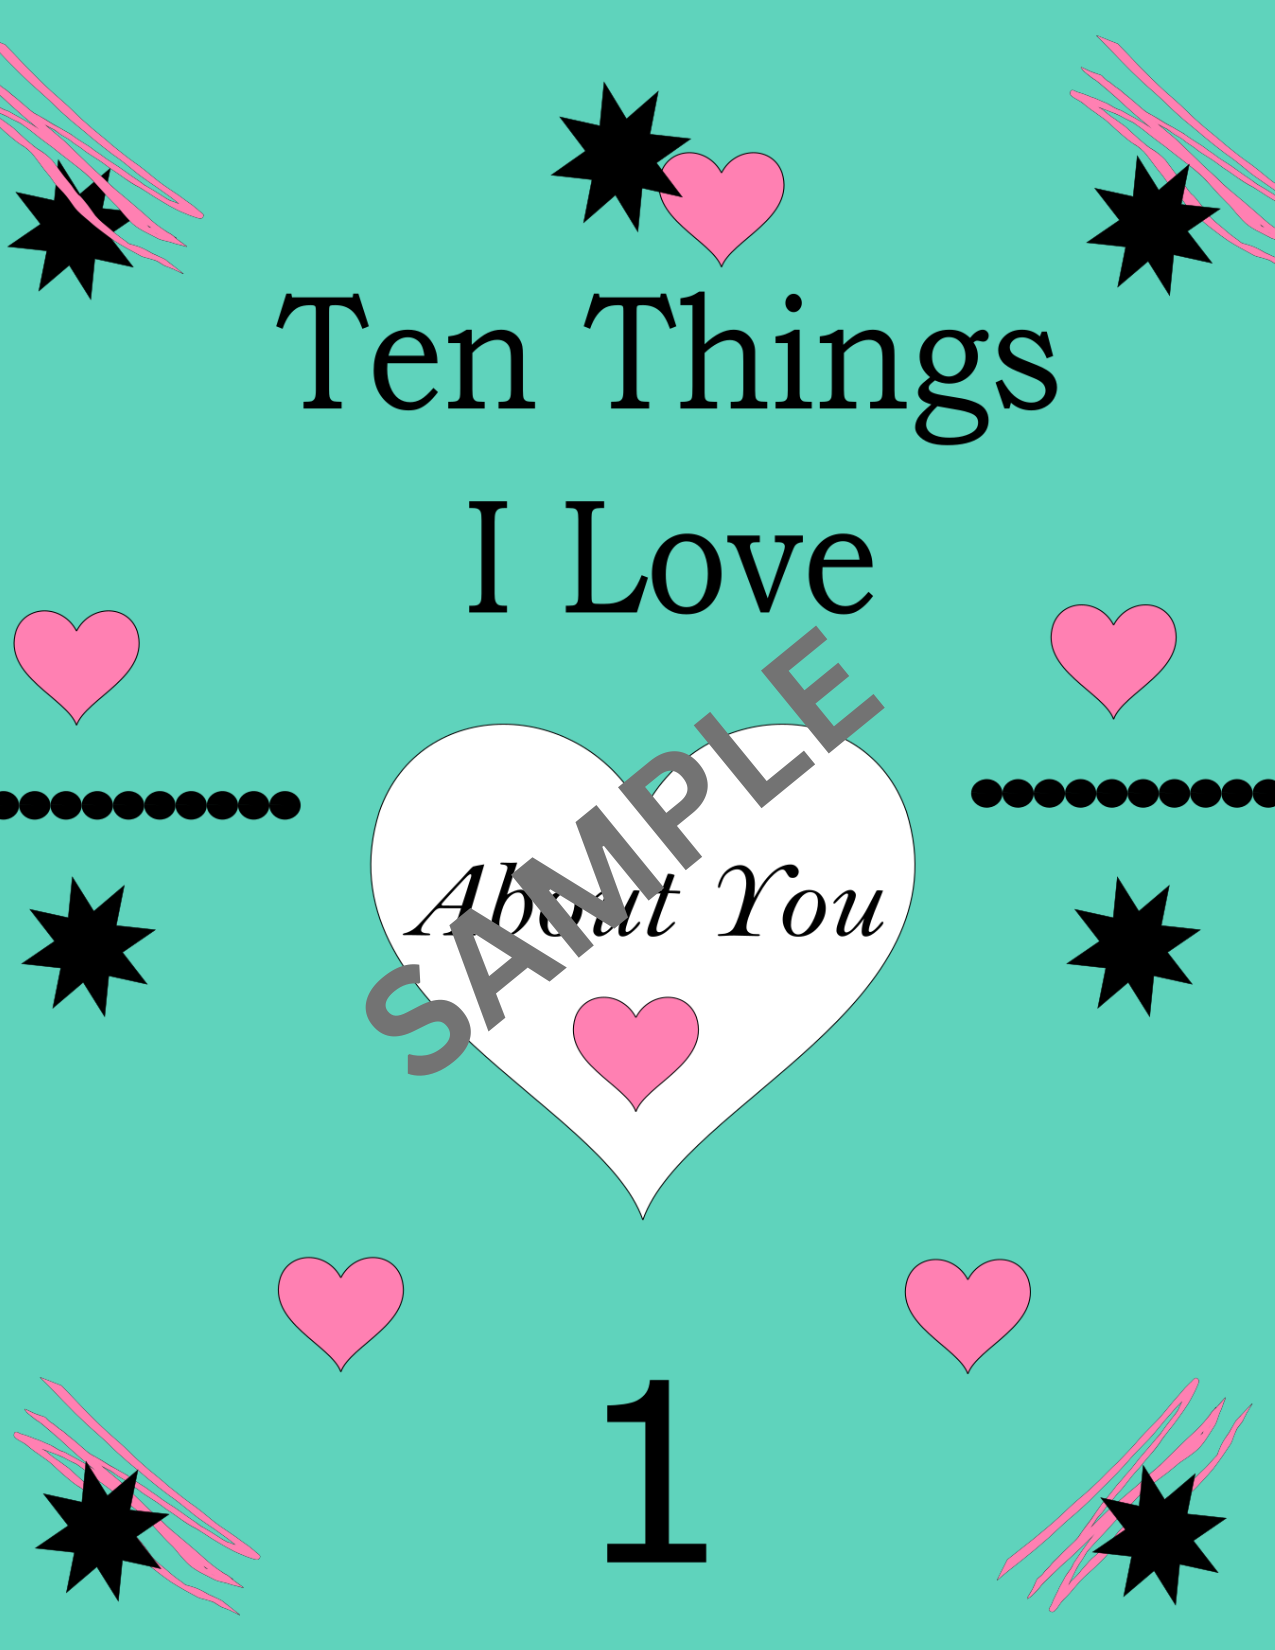 Ten Things I Love About You Printable Cards - Watermelon